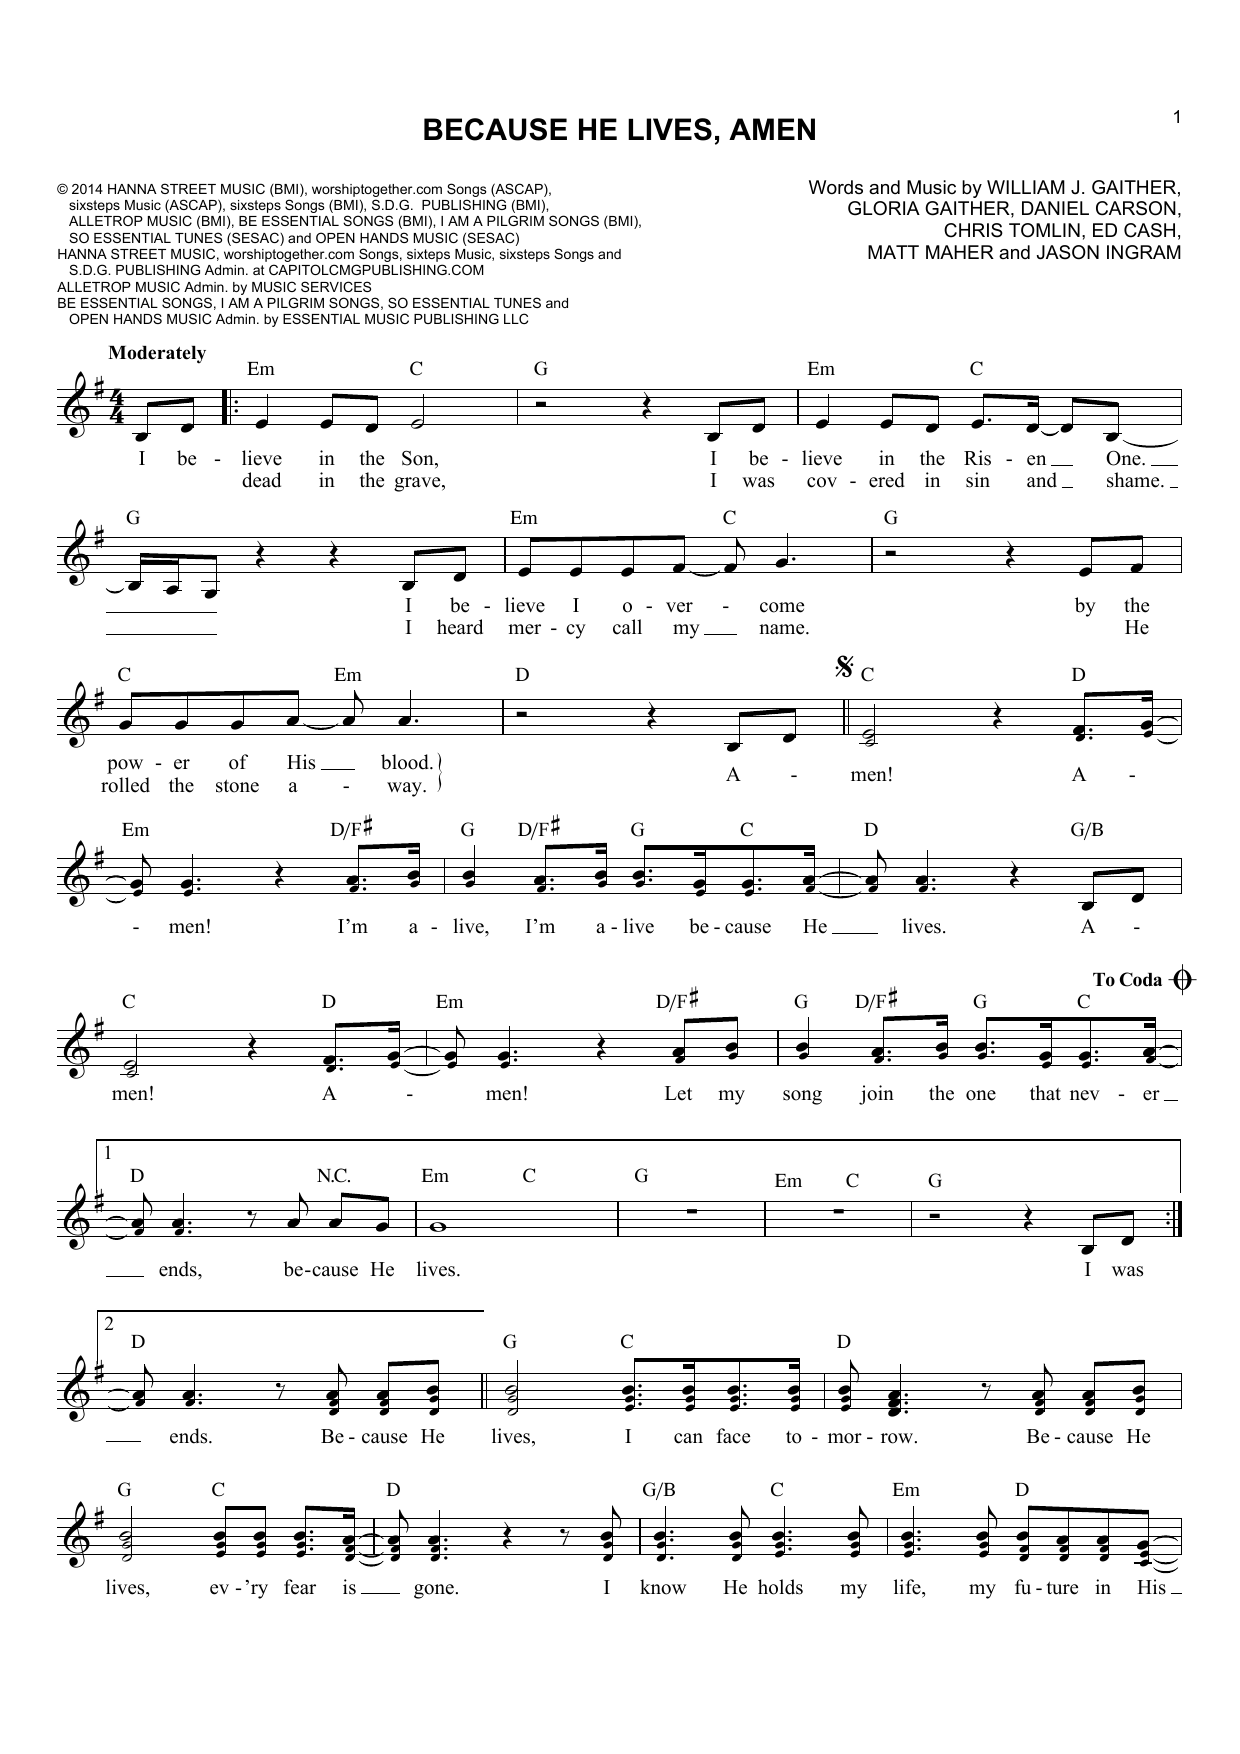 Download William J. Gaither Because He Lives, Amen Sheet Music